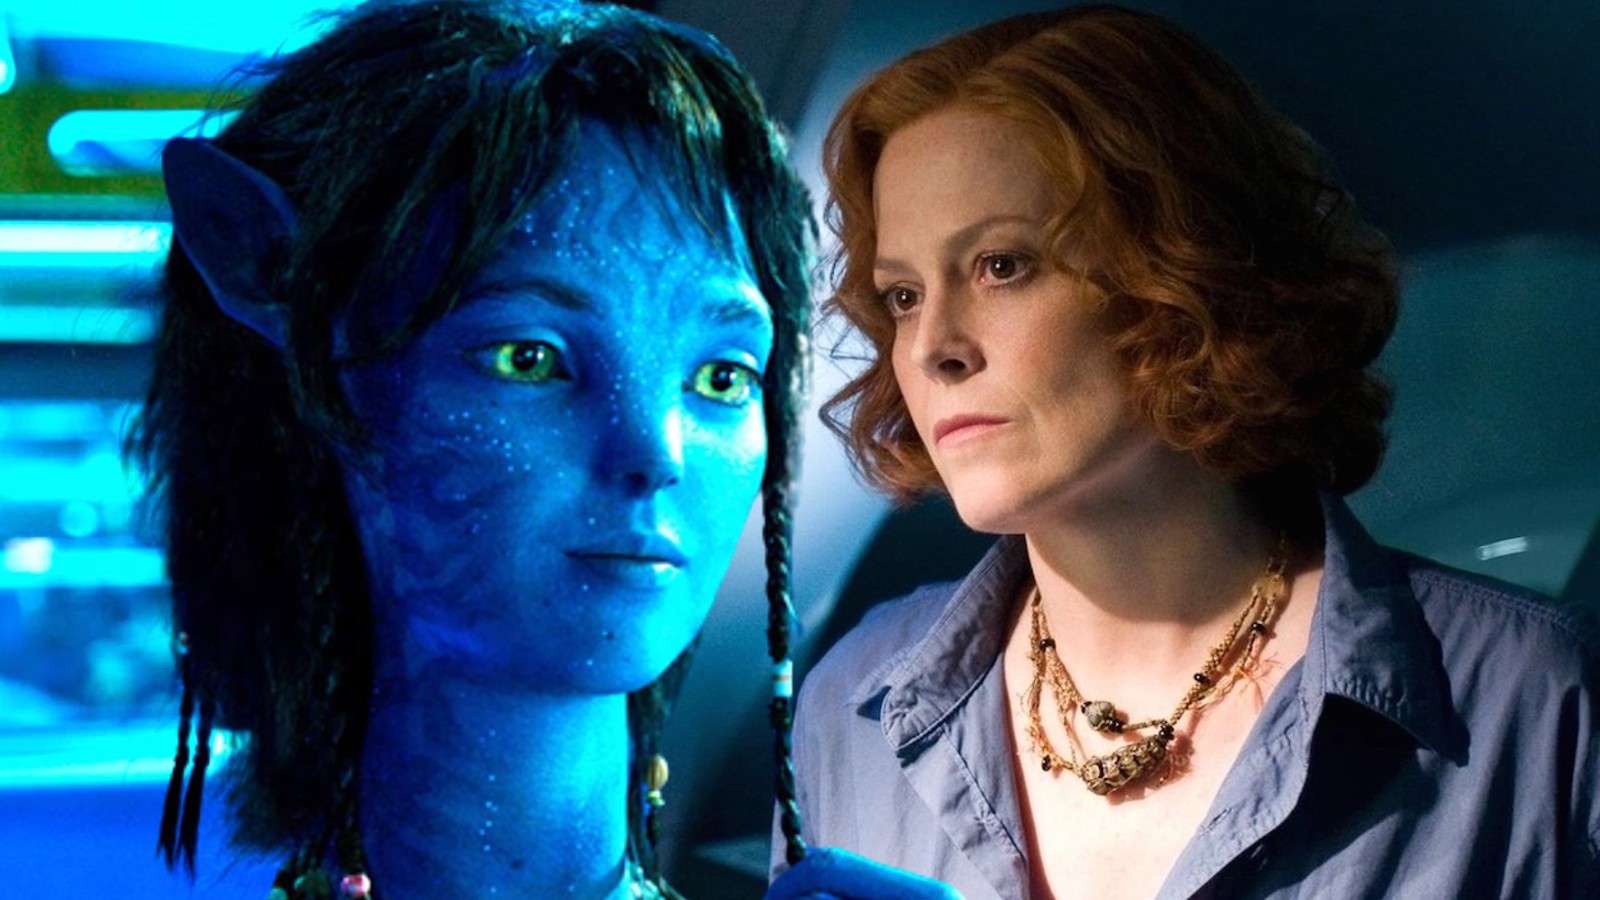 Kiri in Avatar 2, and Sigourney Weaver as Grace Augustine in Avatar